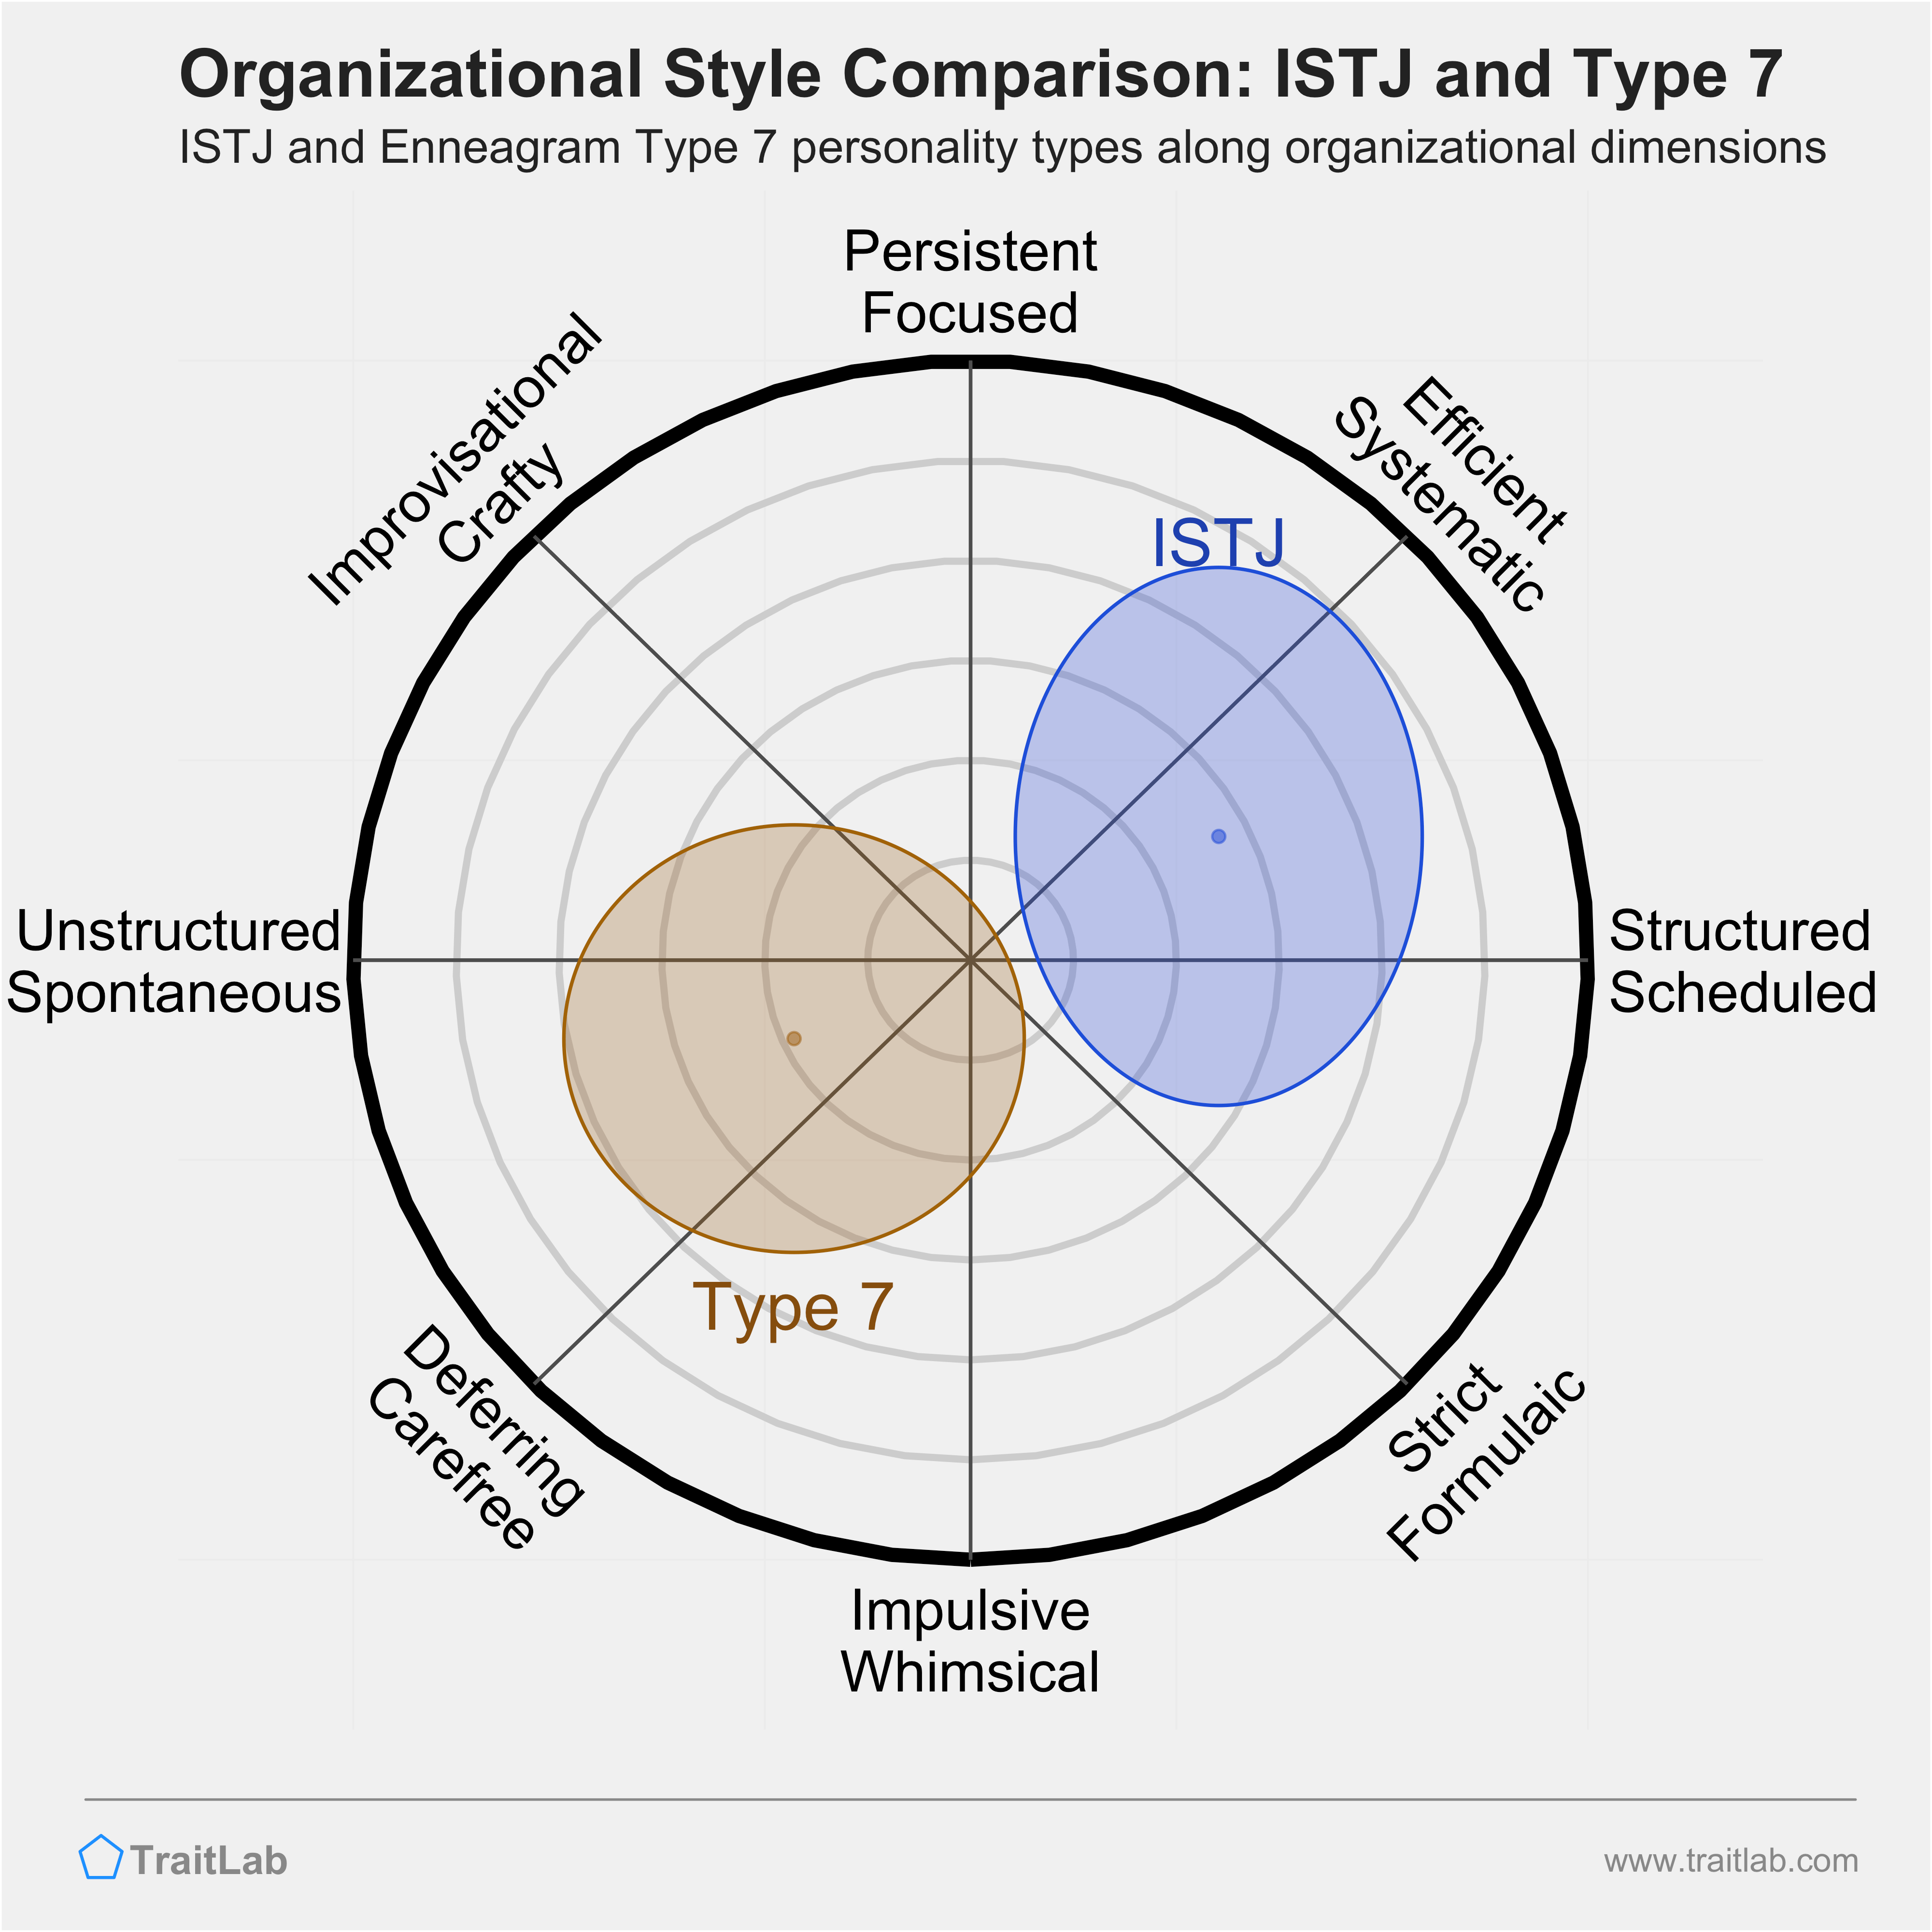 ISTJ and Type 7 comparison across organizational dimensions